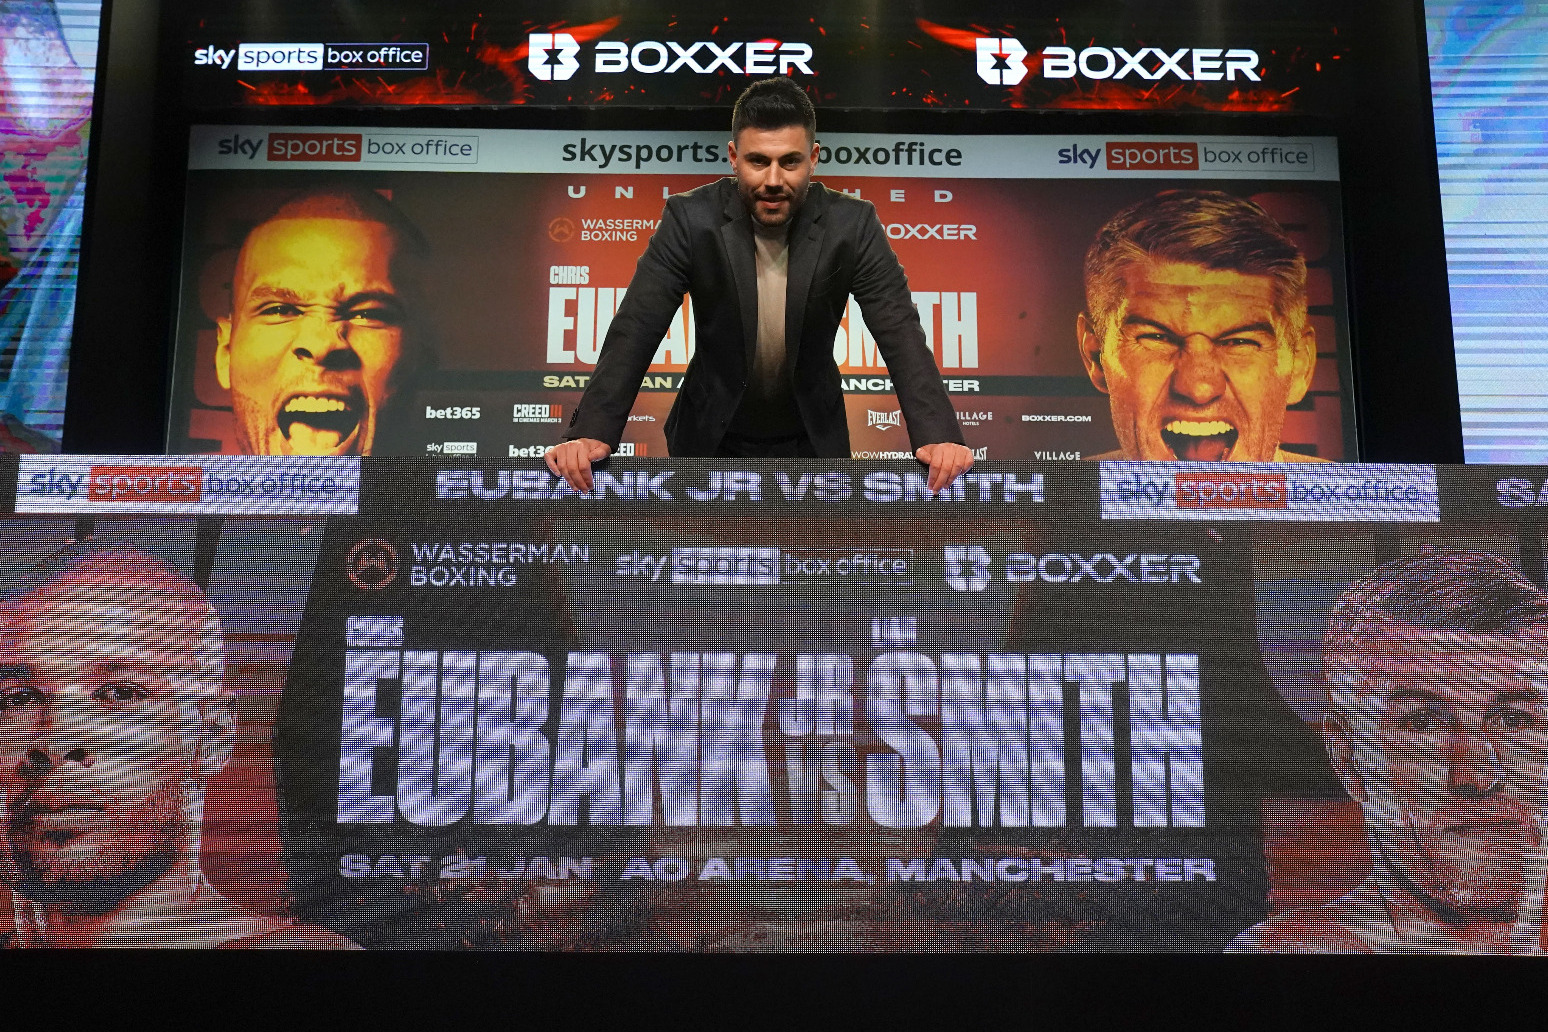 Chris Eubank Jr says Liam Smith ’embarrassed himself’ in controversial exchange 